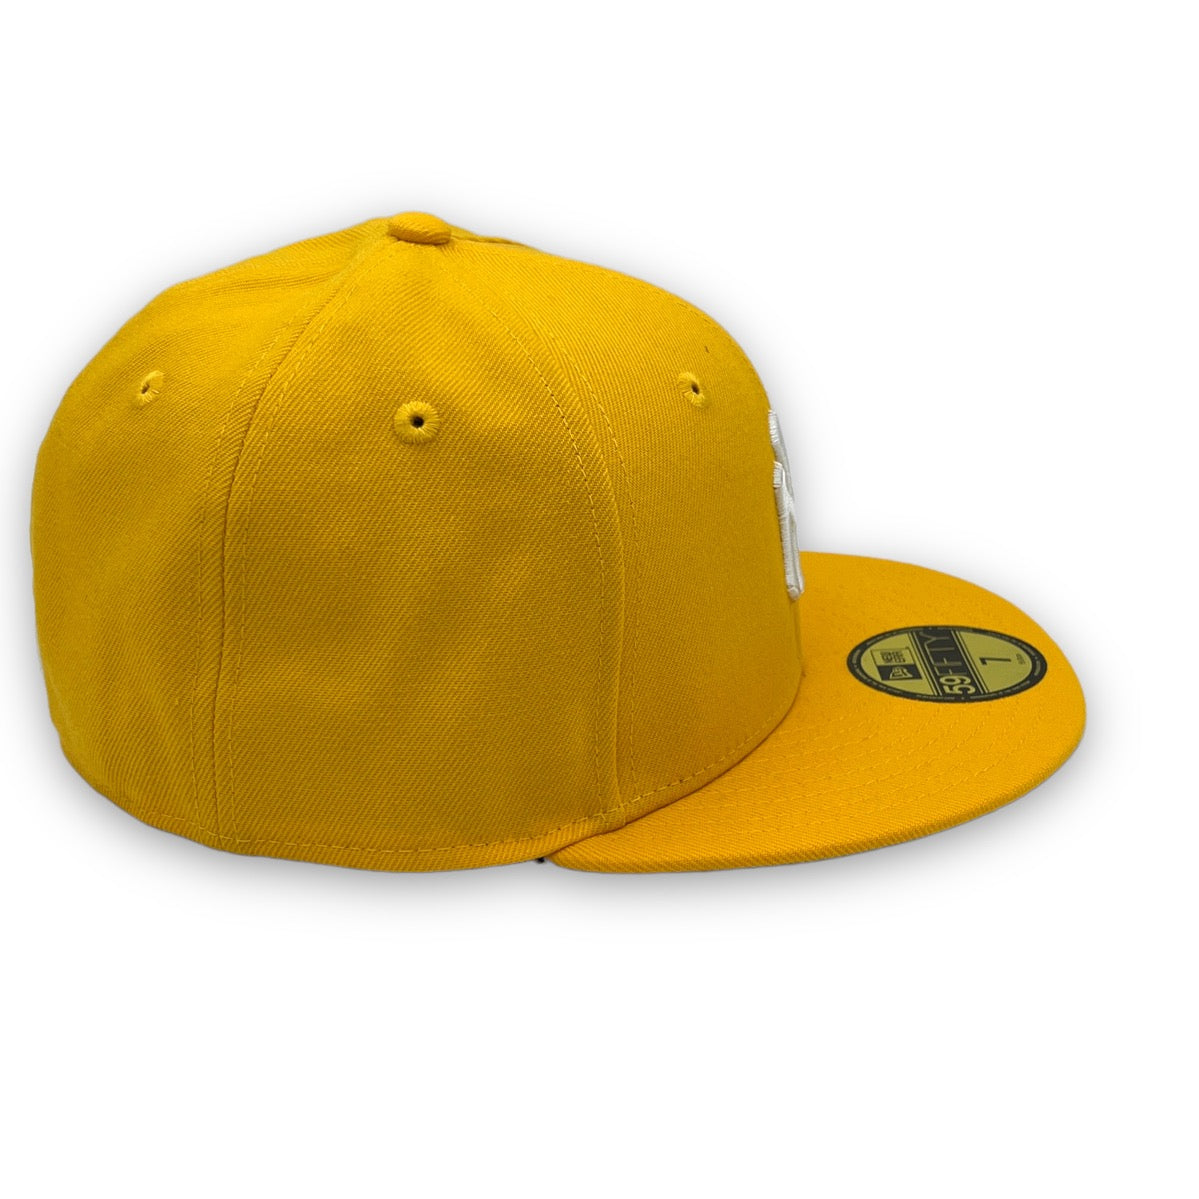 New York Yankees IMPERIAL Navy-Yellow Fitted Hat by New Era